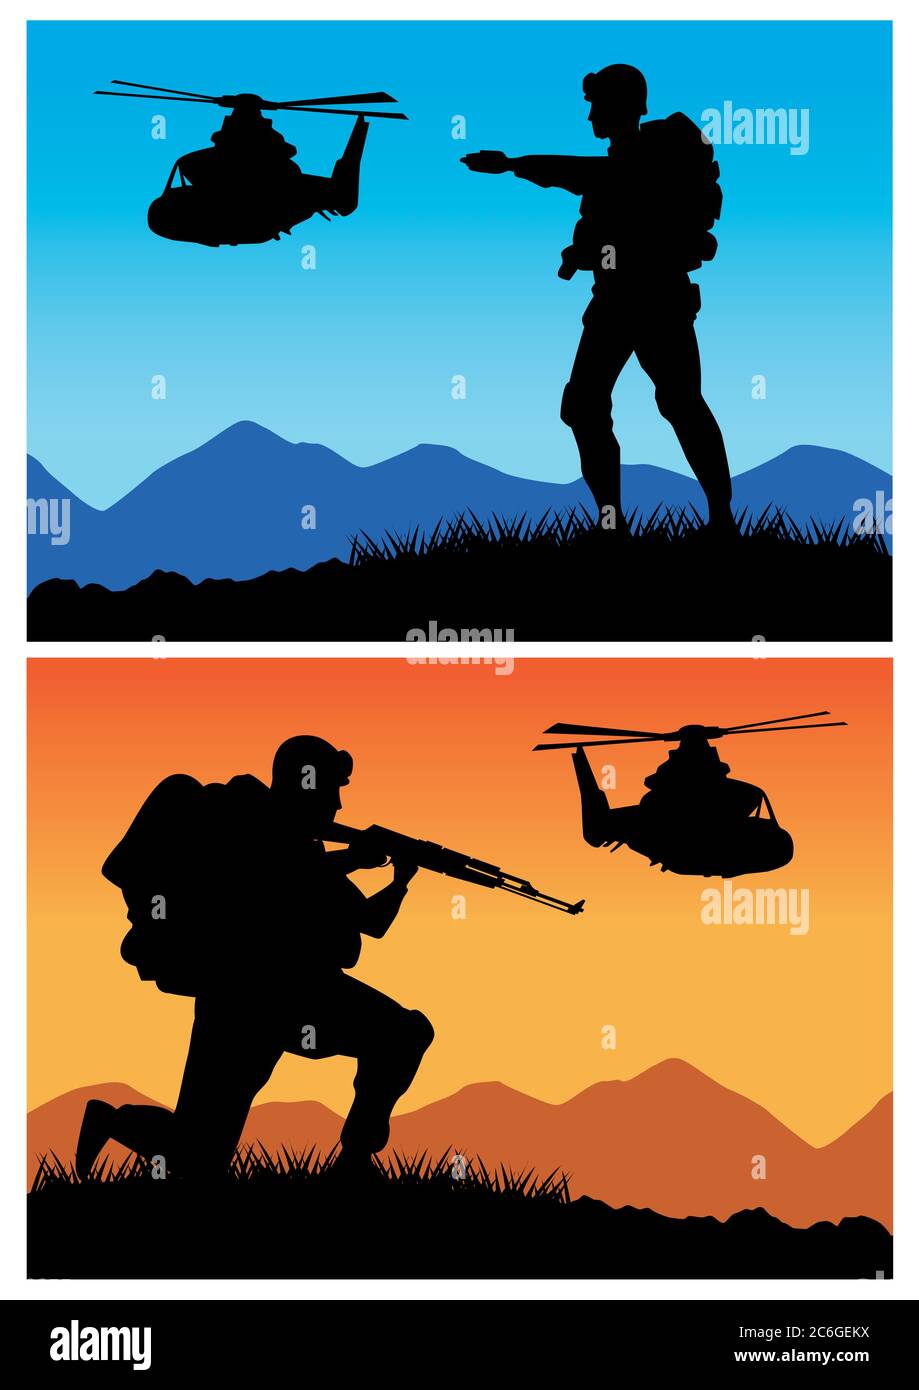 military soldiers with guns and helicopters silhouettes vector illustration design Stock Vector